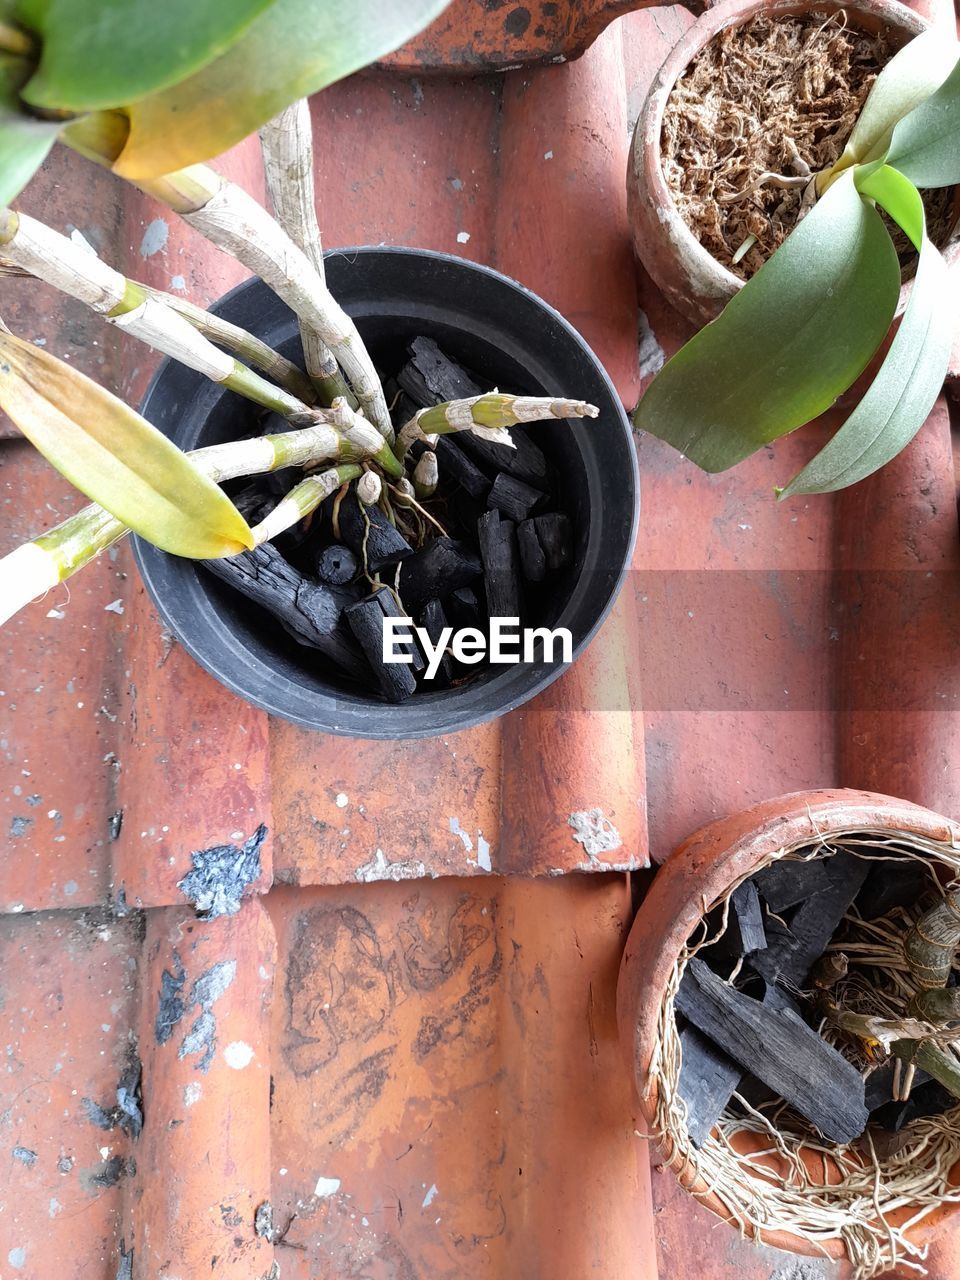 HIGH ANGLE VIEW OF POTTED PLANT ON METAL CONTAINER